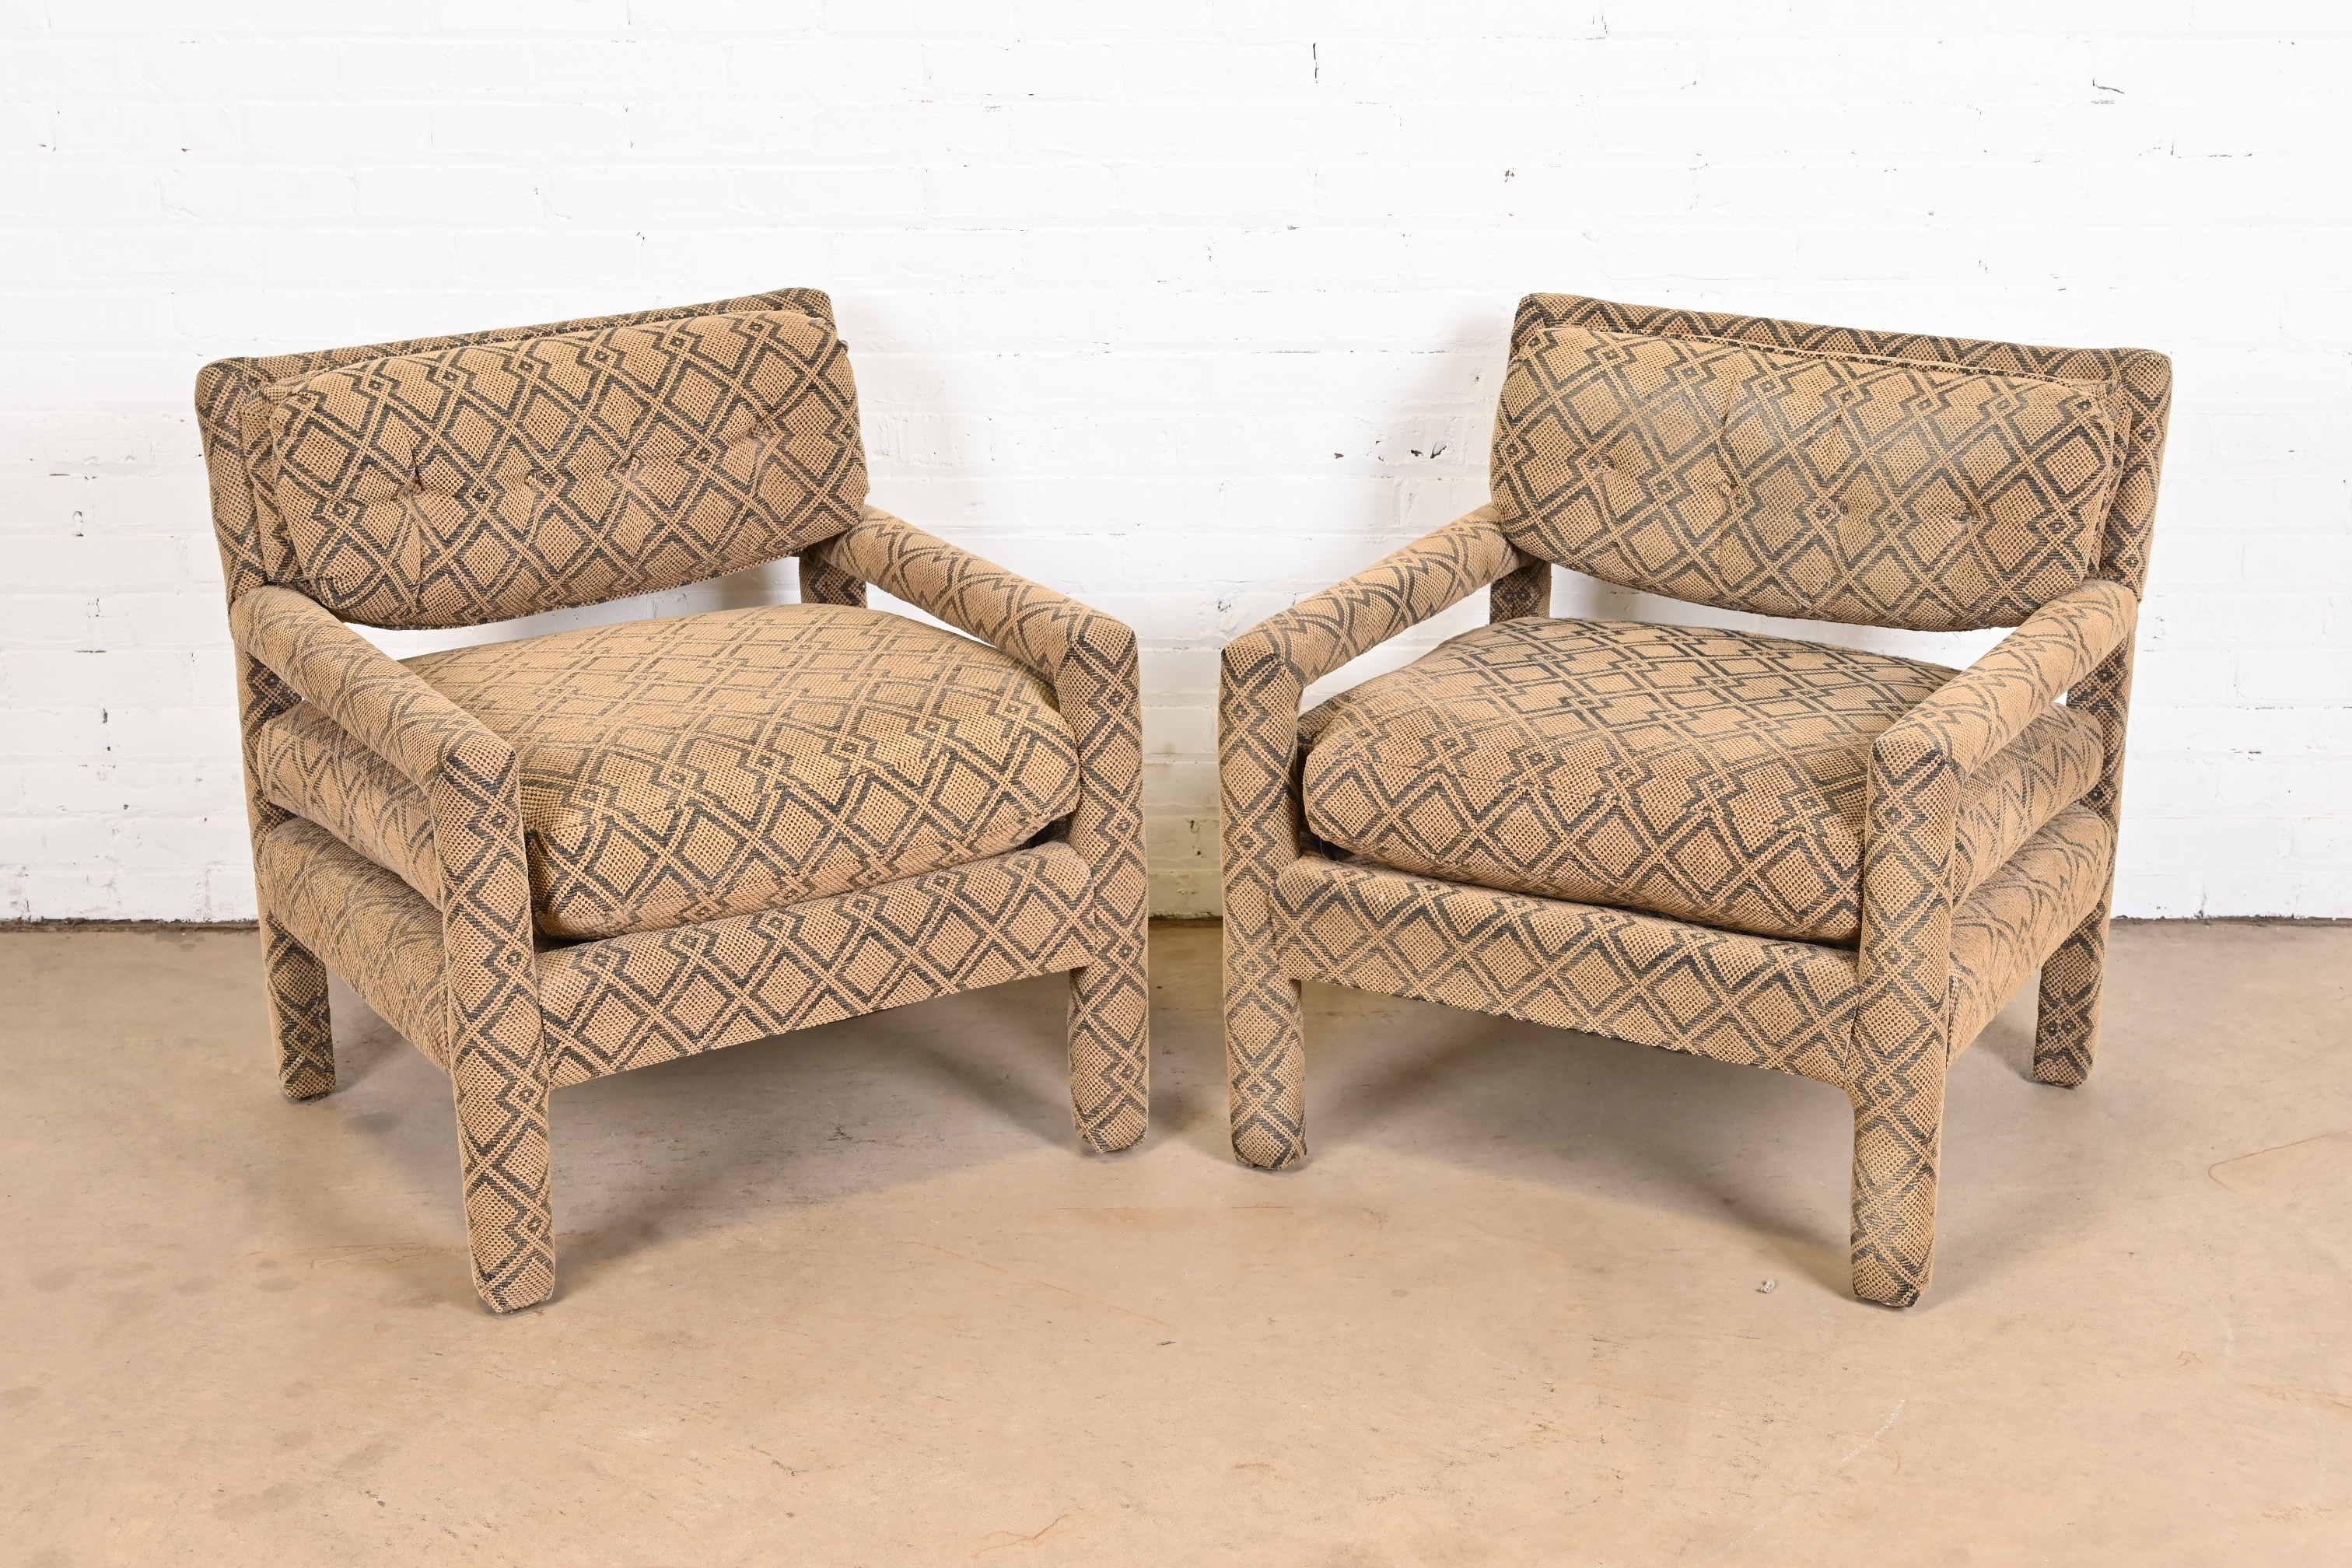 A gorgeous pair of Mid-Century Modern armchairs, club chairs, or lounge chairs in original African Kuba cloth style upholstery.

In the style of Milo Baughman

USA, circa 1970s

Measures: 28.5